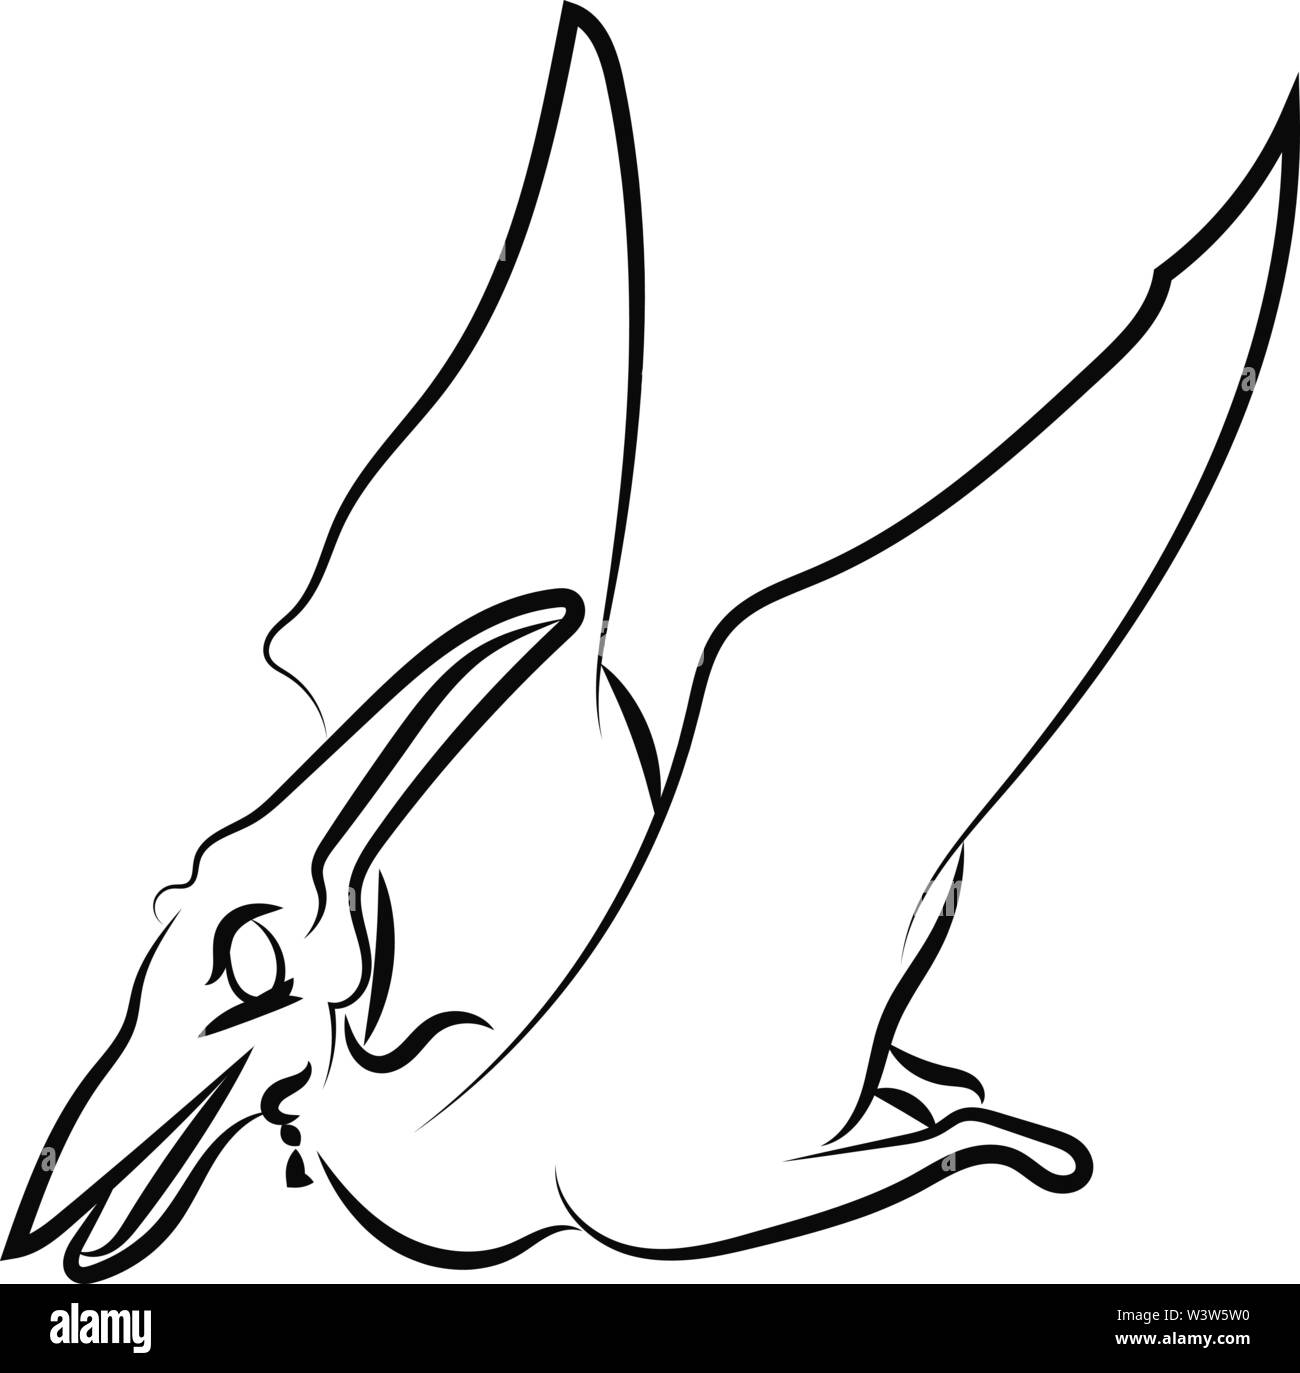 Pteranodon drawing, illustration, vector on white background. Stock Vector